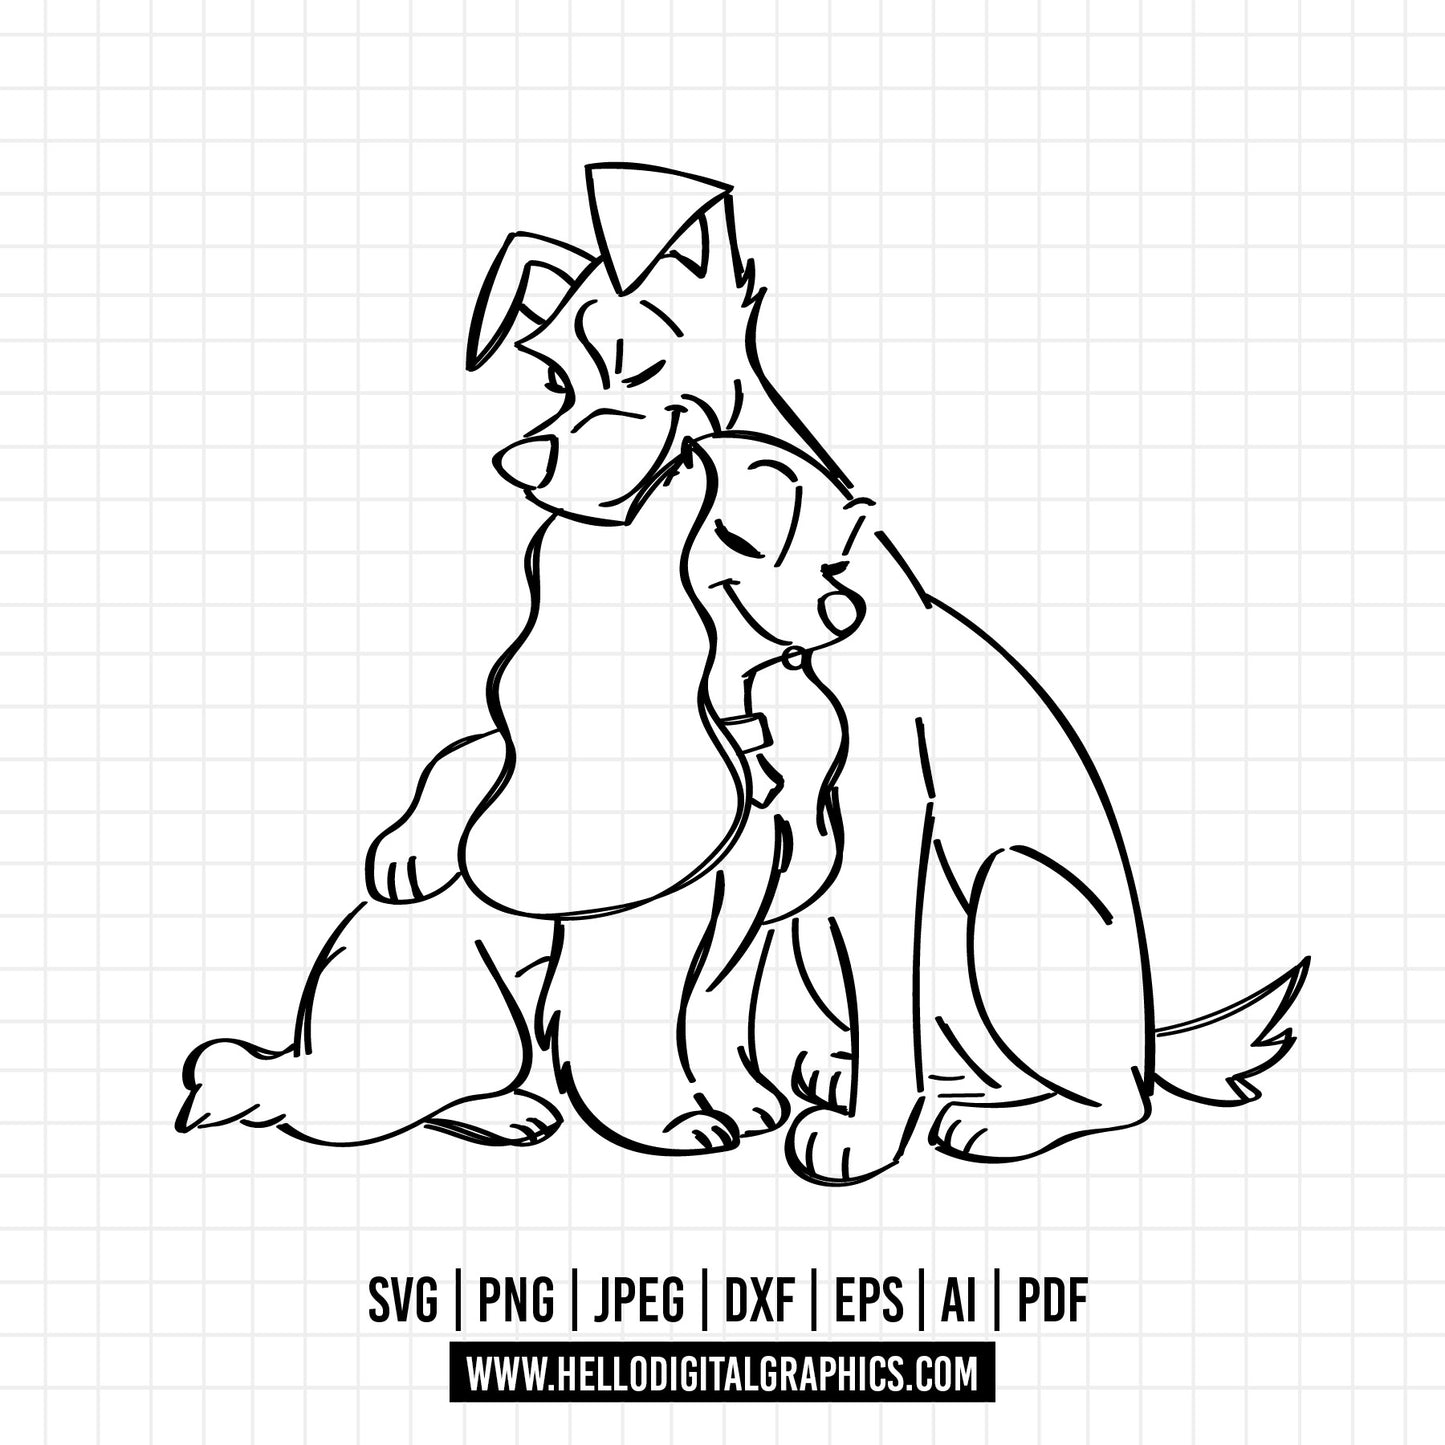 COD635- Lady and the Tramp - Digital Download, Instant Download, svg, dxf, eps & png files included!